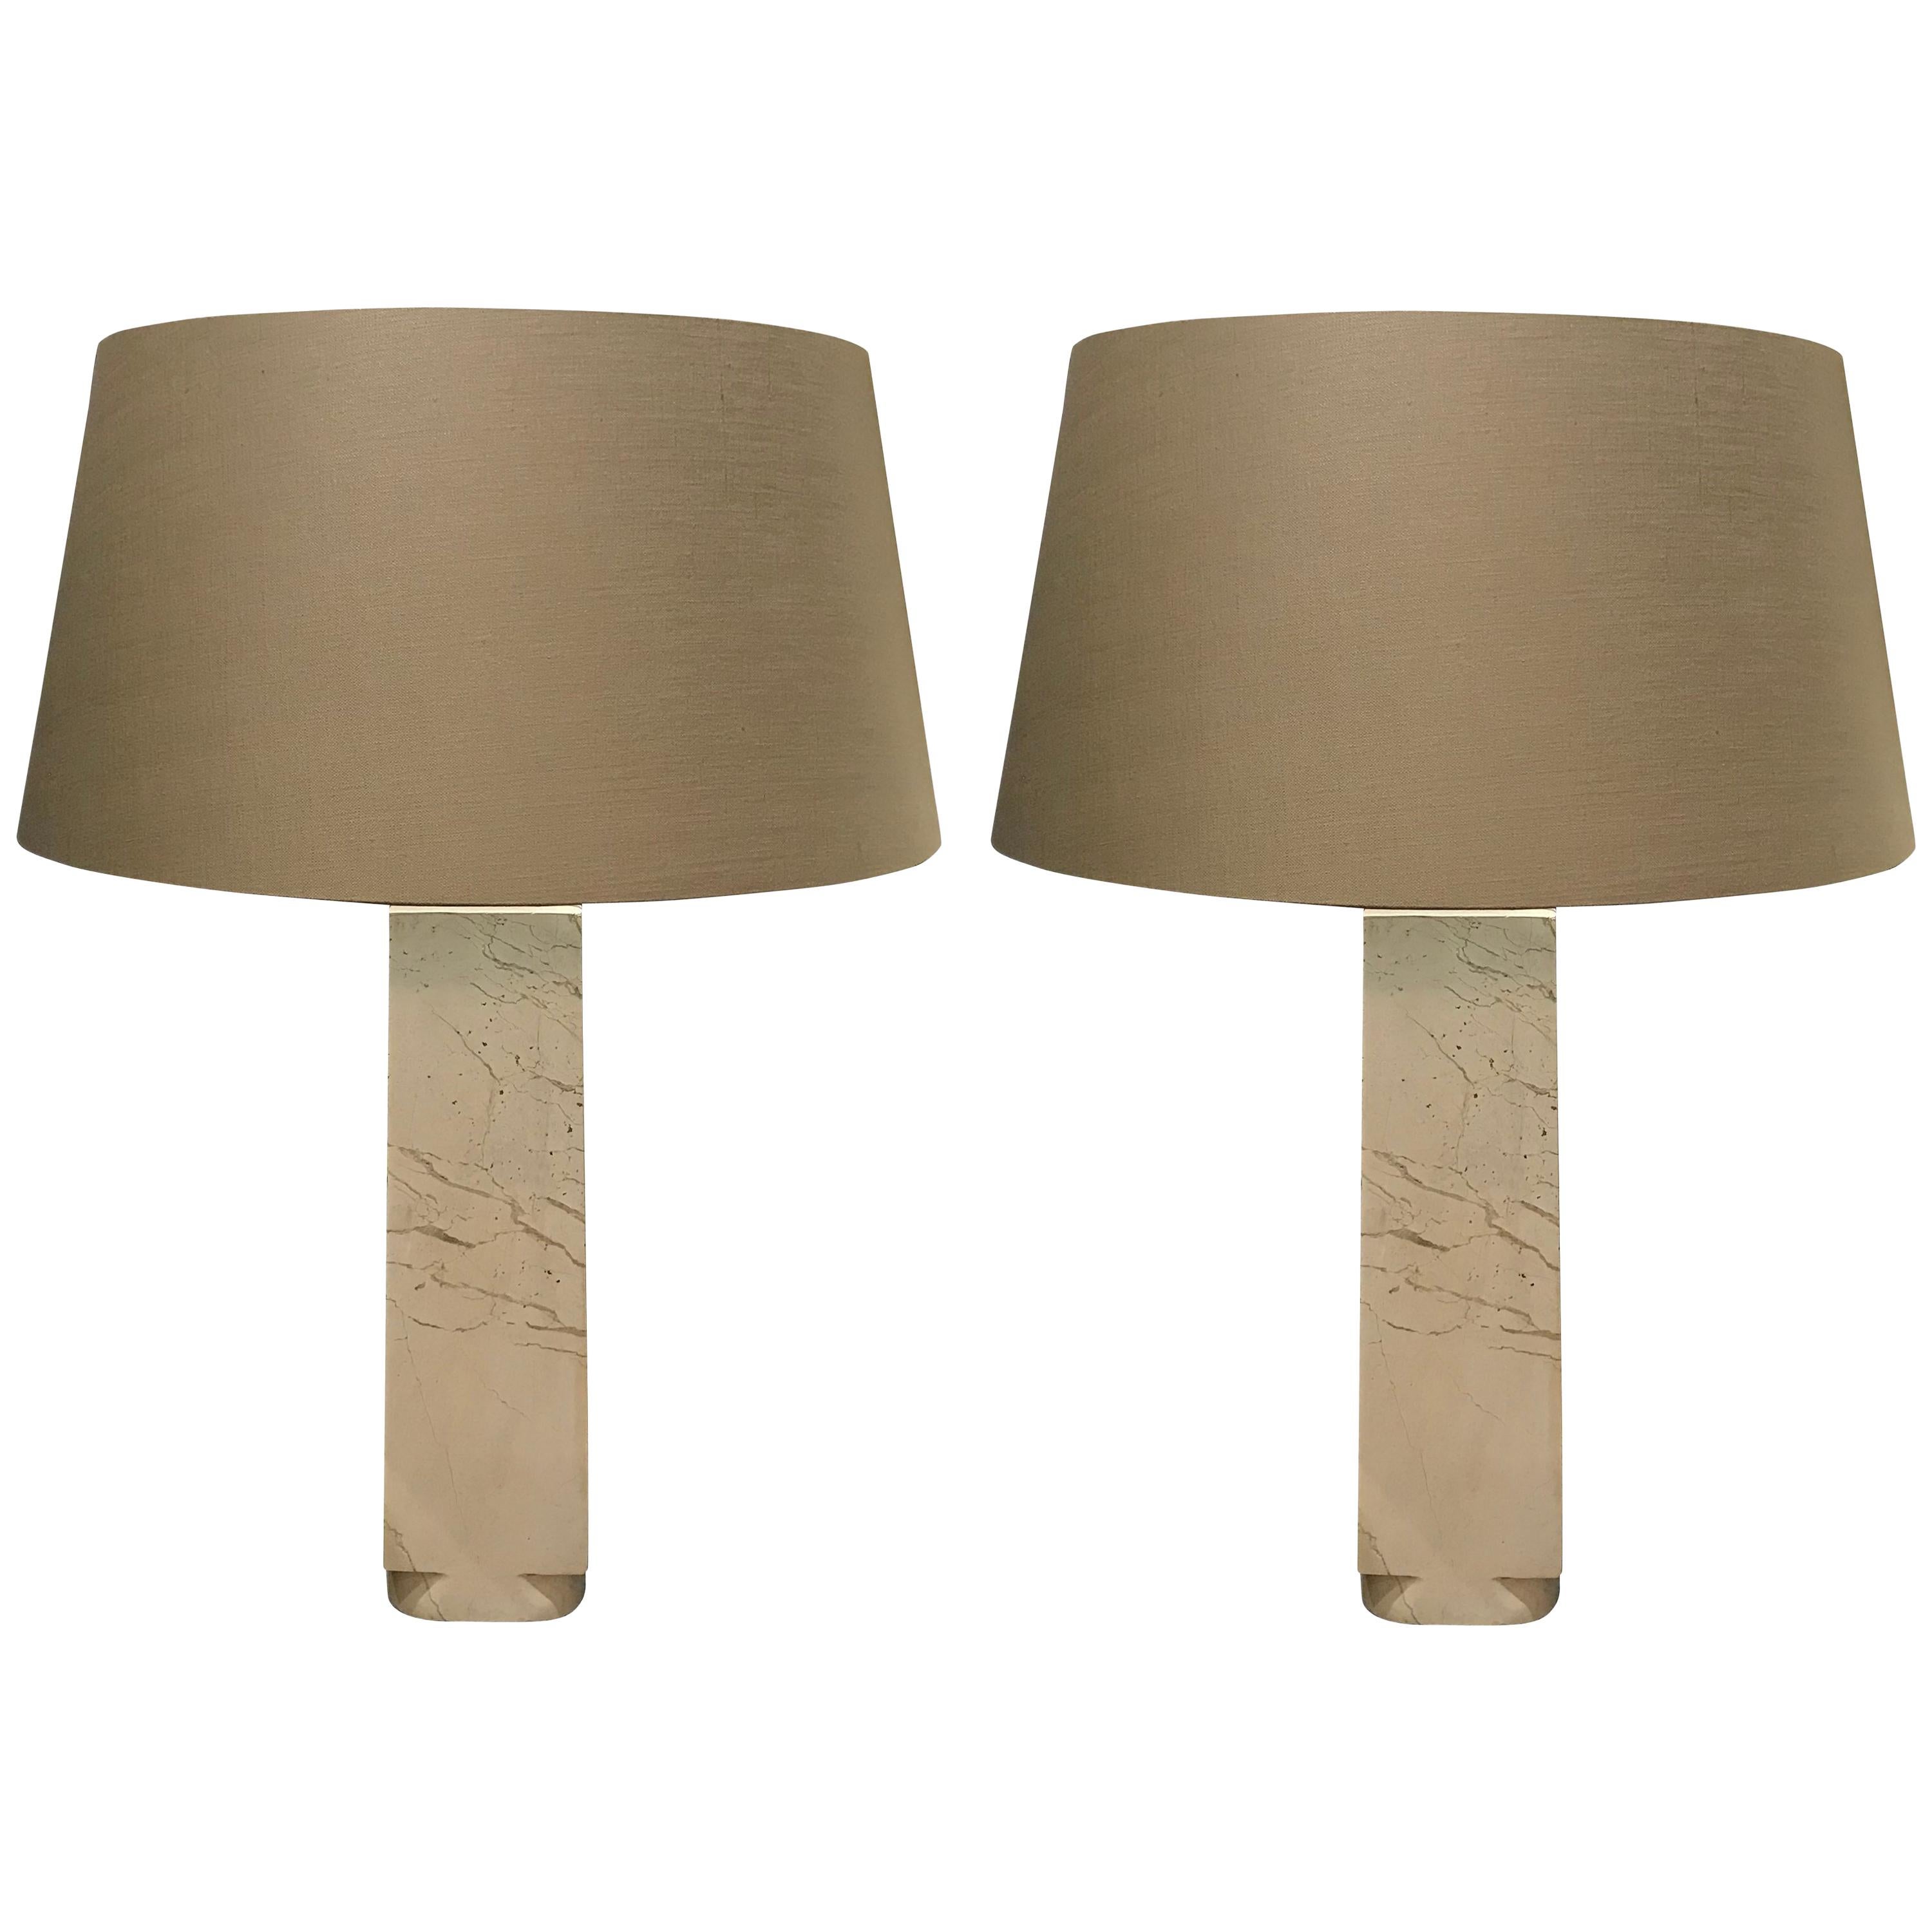 Pair of White Marble Lamps, China, Contemporary